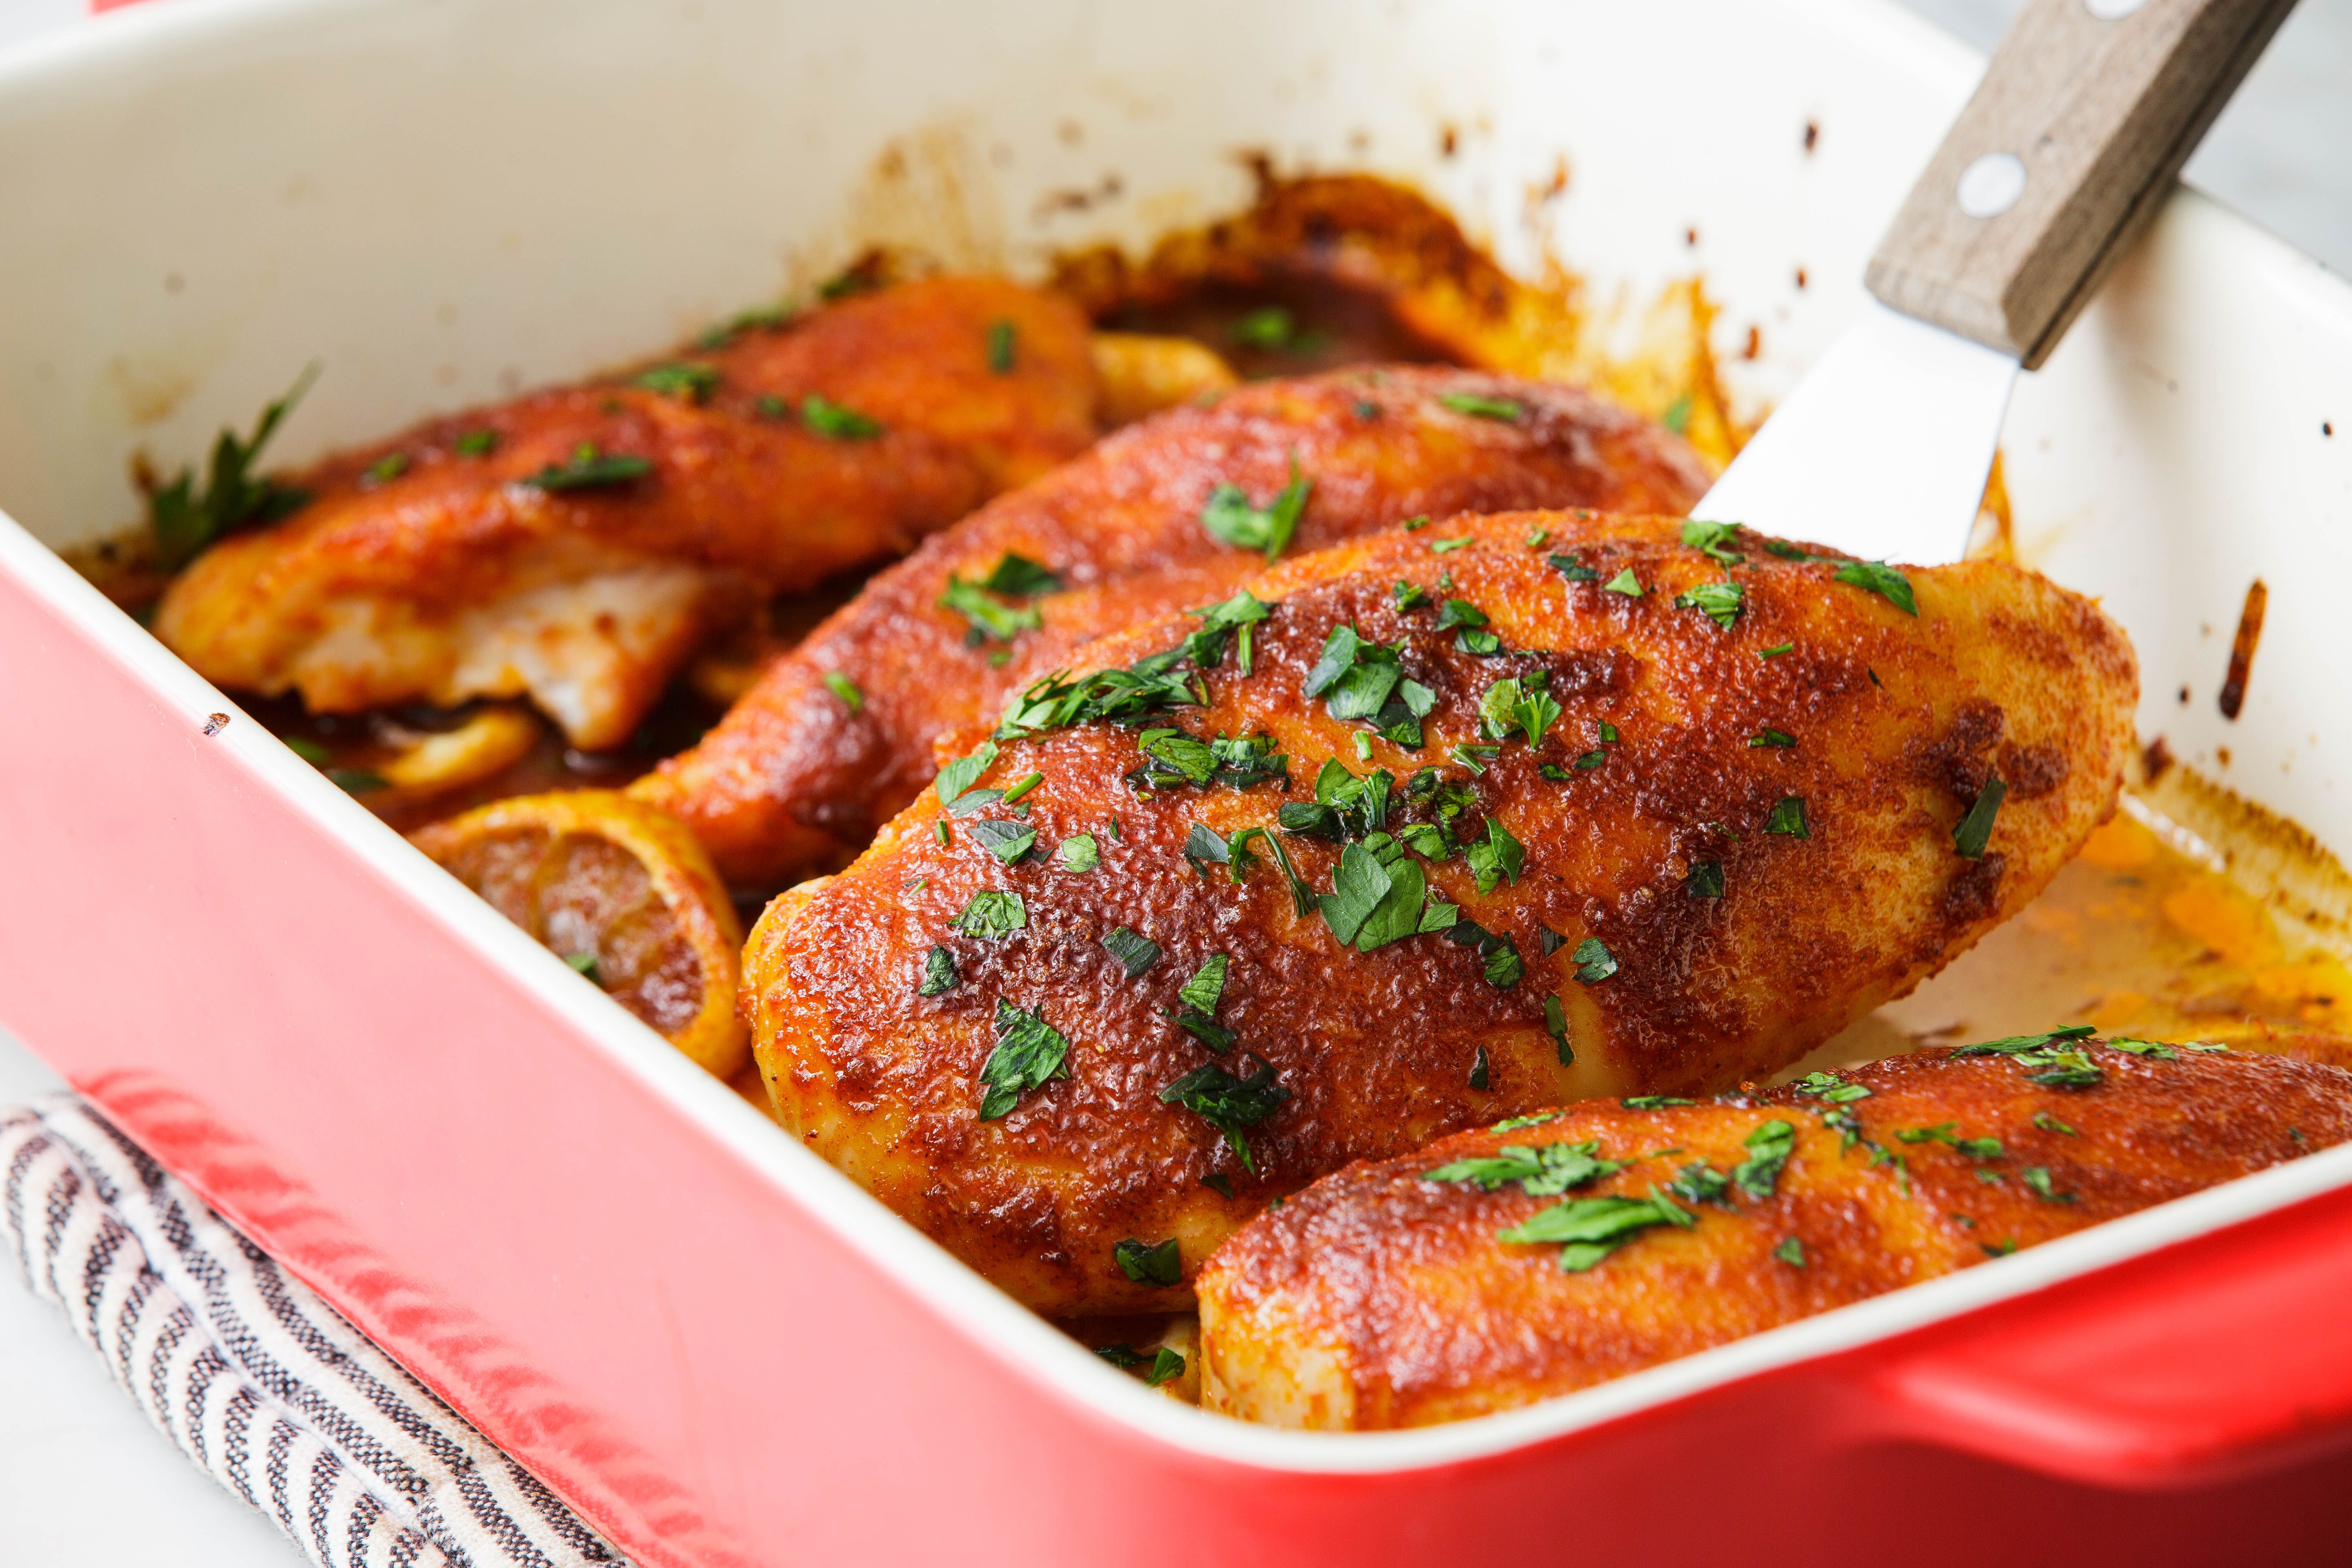 Oven Baked Chicken Breast Recipe How To Bake Flavorful Chicken,Domesticated Fox Floppy Ears